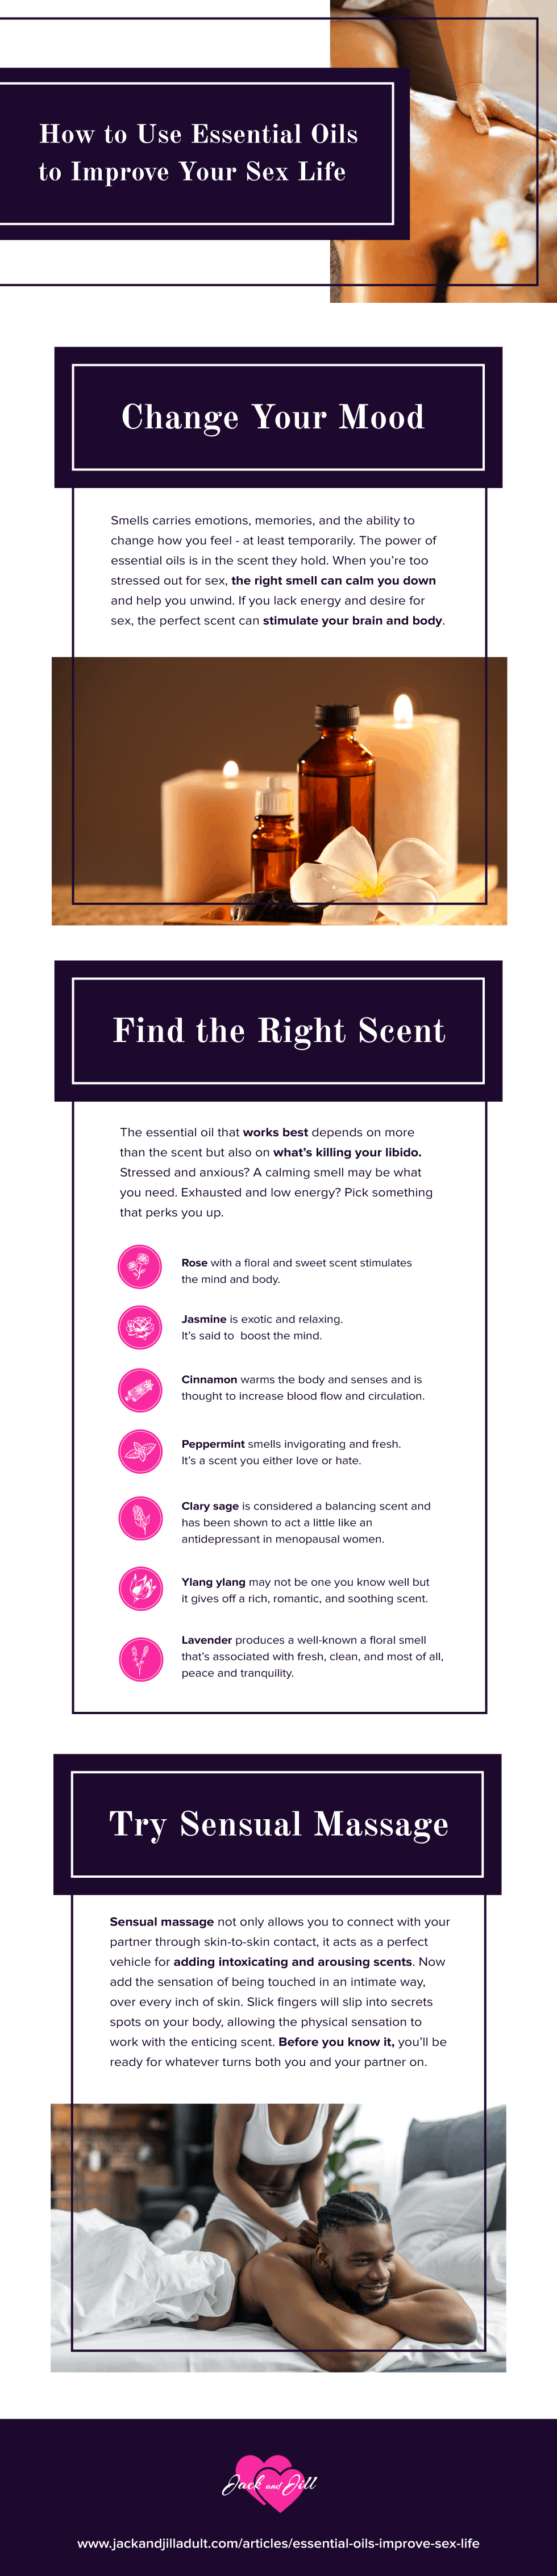 Infographic for Using Essential Oils To Improve Your Sex Life